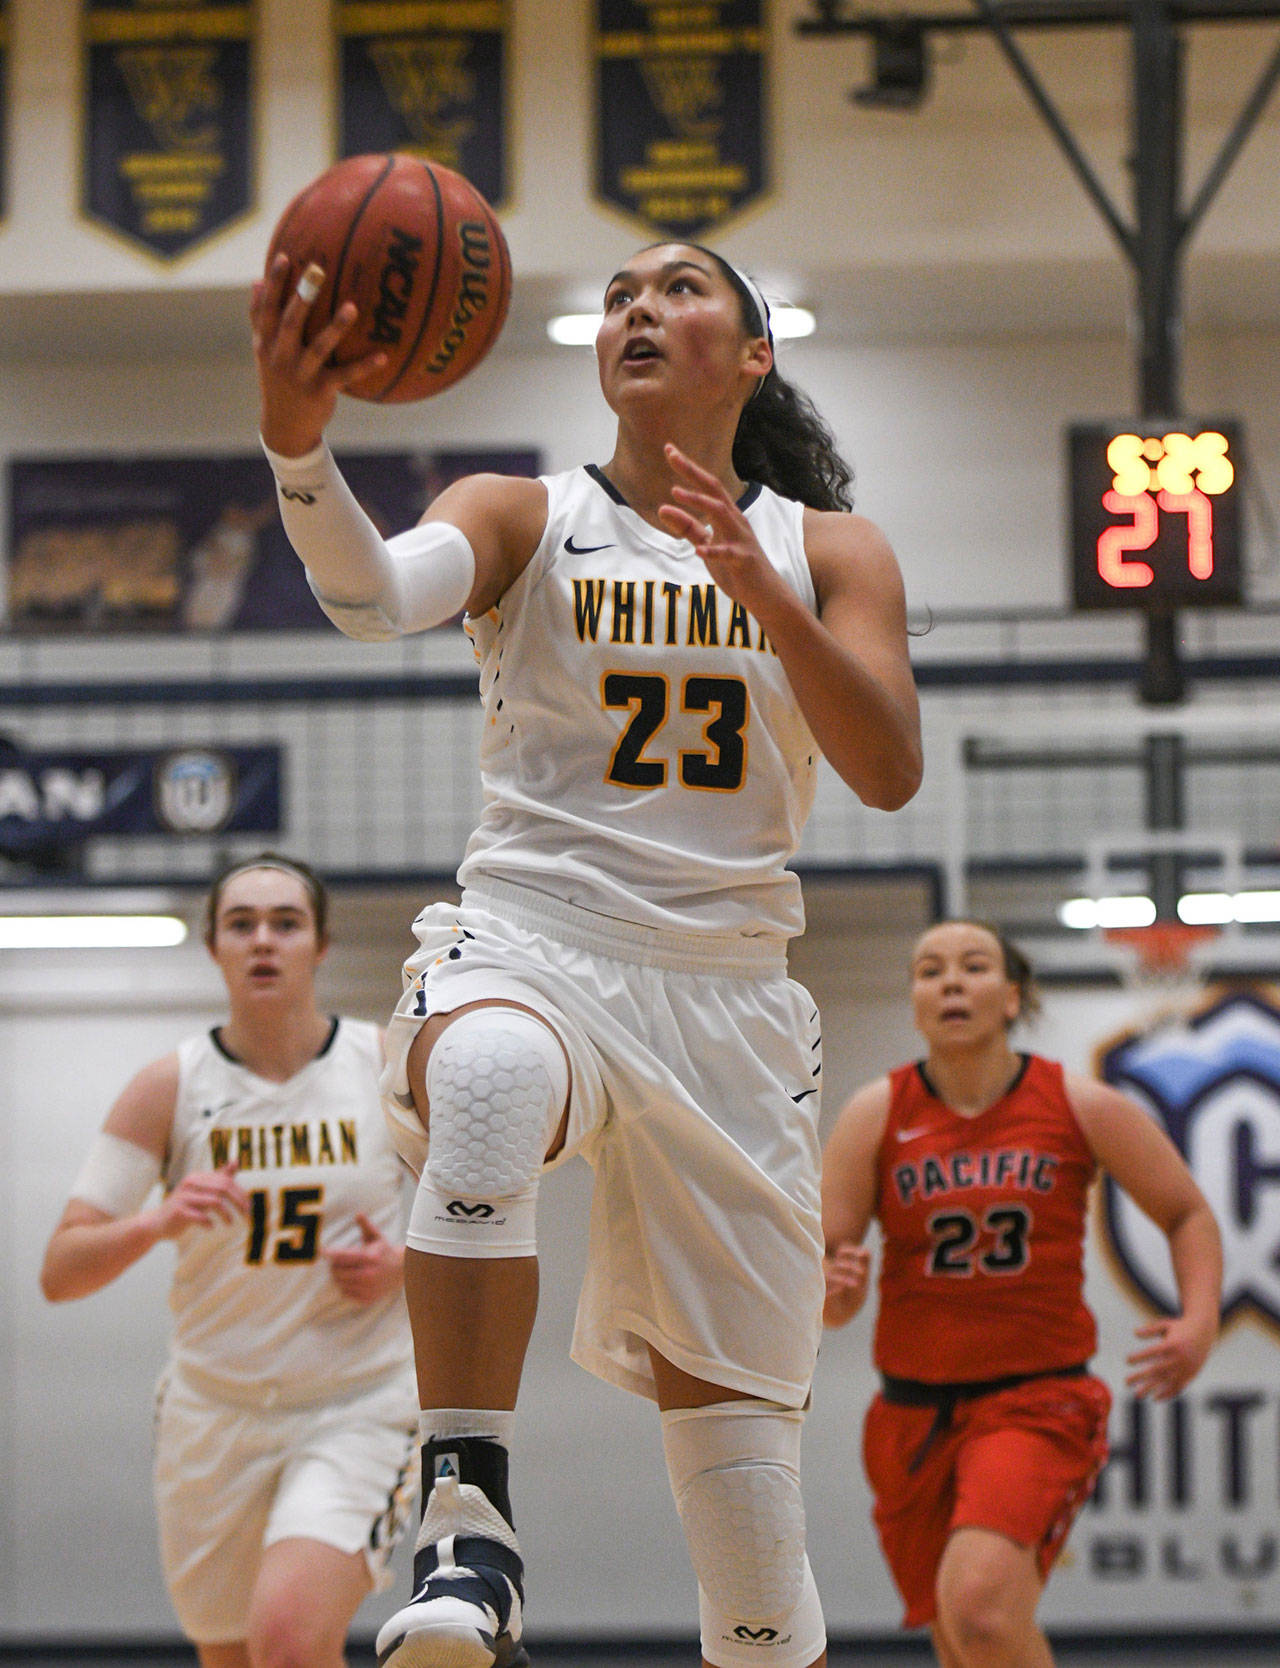 Makana Stone, shown here in a game last season, was named the Northwest Conference’s Player of the Year this week.